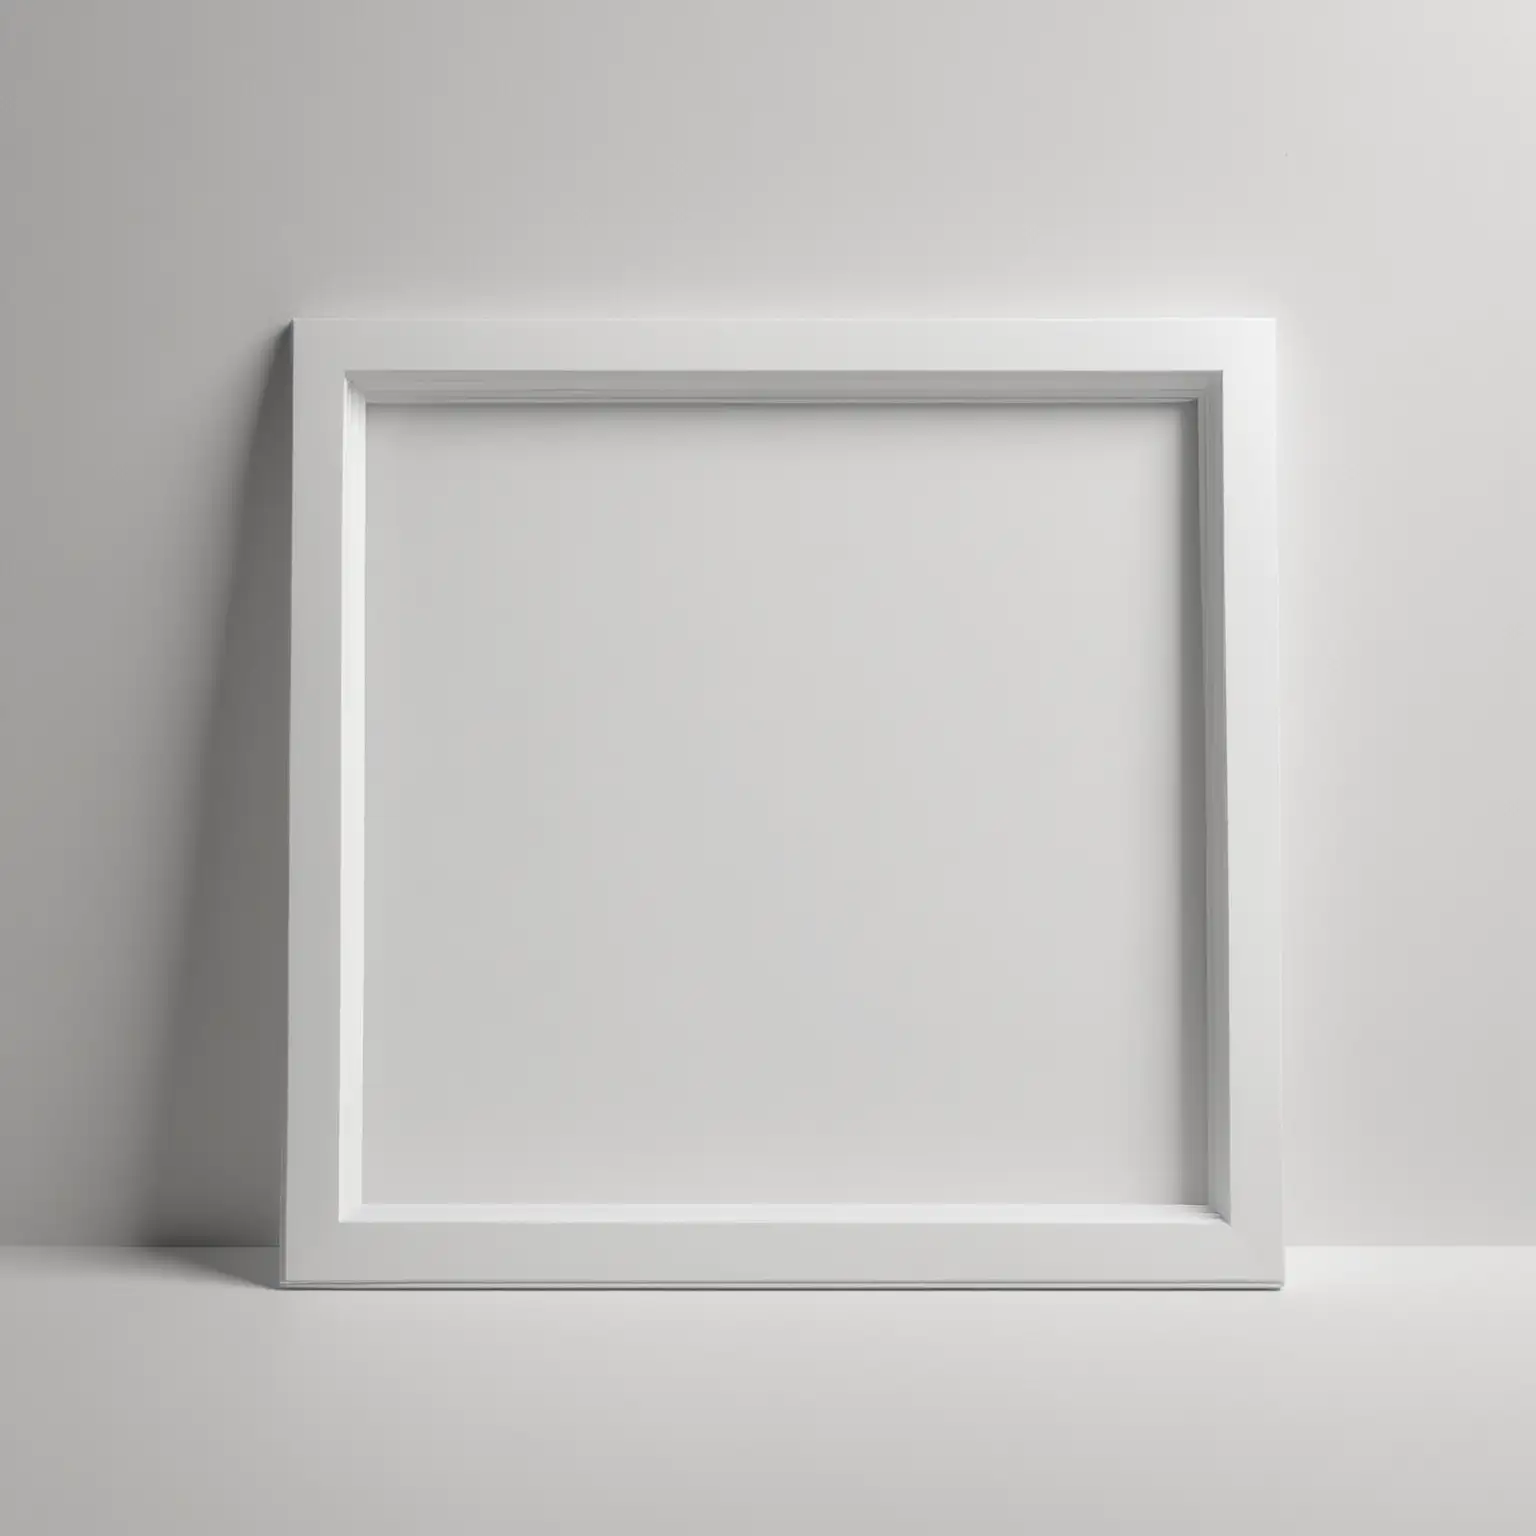 Photo of a flat photo frame, white color, square shape, with good lighting and 4k details. Captured in a high-resolution studio setting against a clean white backdrop, showcasing its artisanal craftsmanship. --ar 3:4 --v 6.0 --iw .5